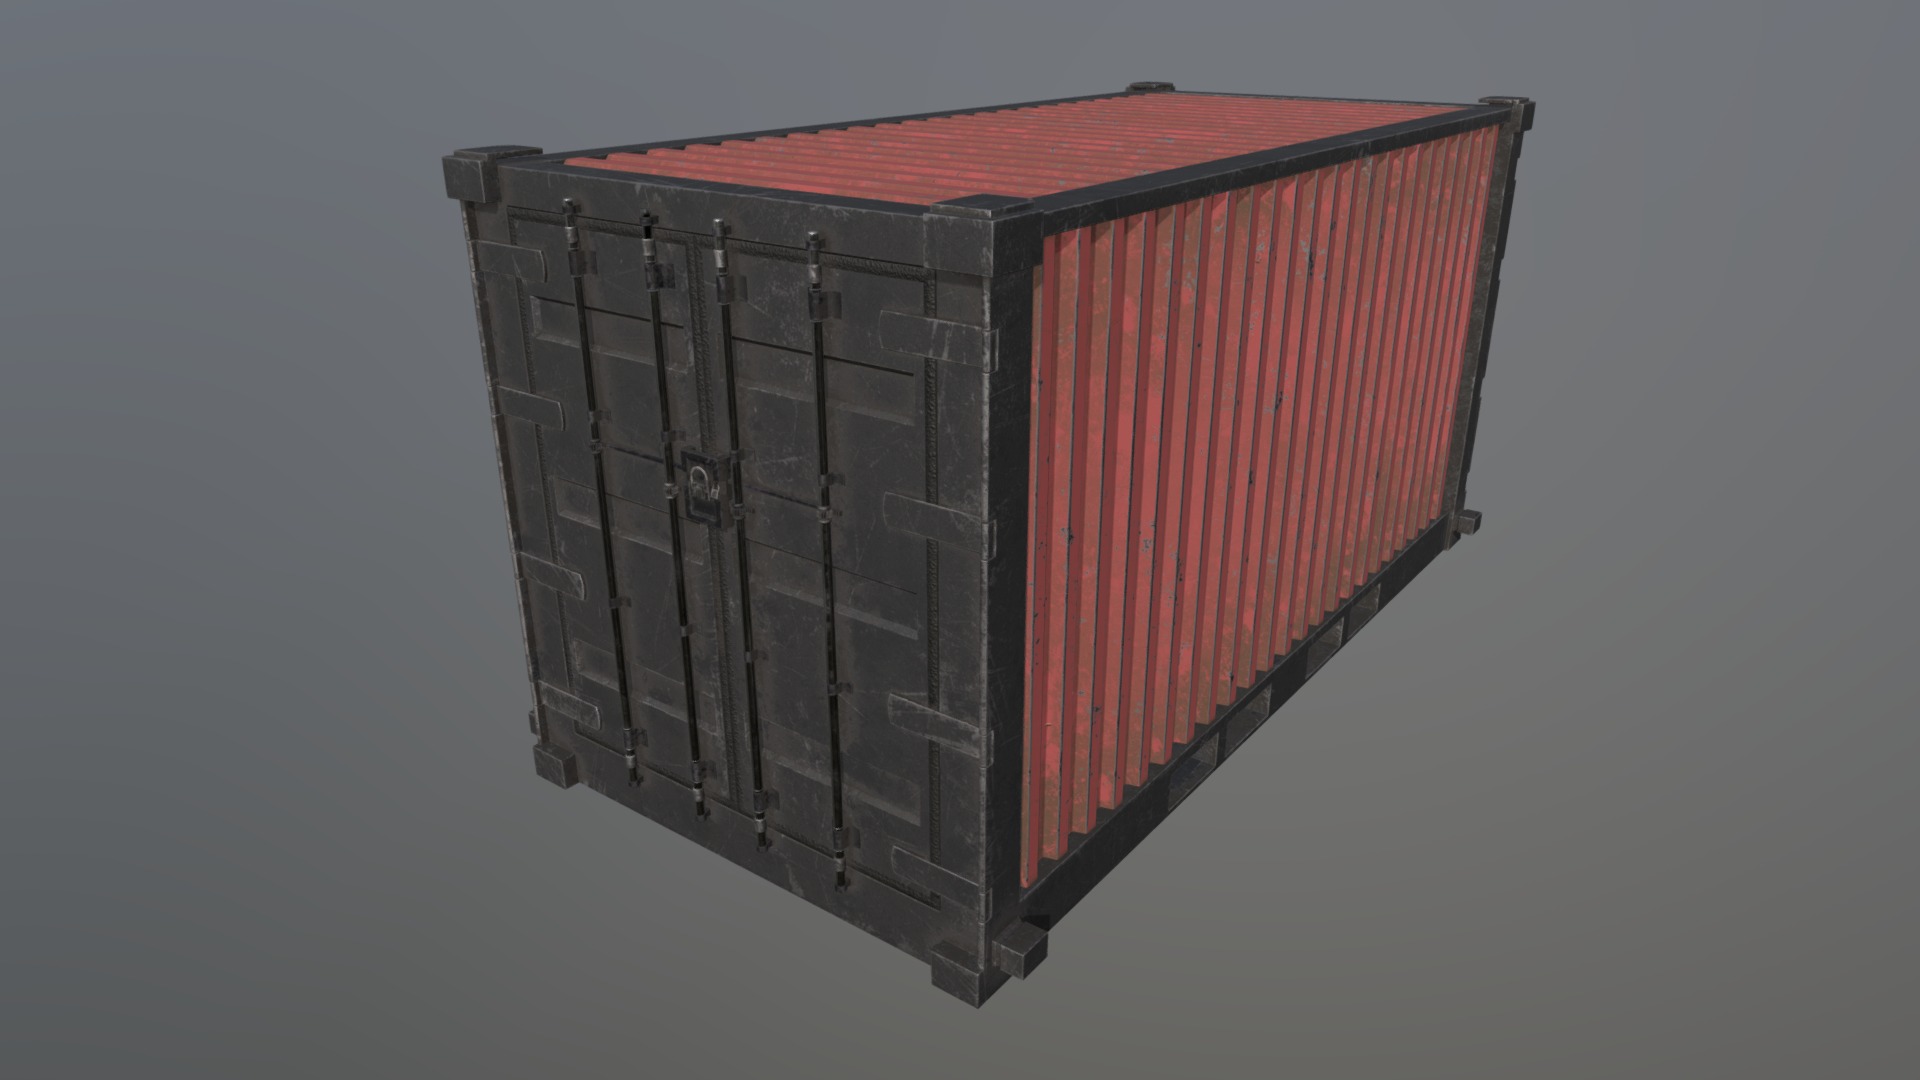 3D model Scifi Shipping Container - This is a 3D model of the Scifi Shipping Container. The 3D model is about a red box with a black lid.